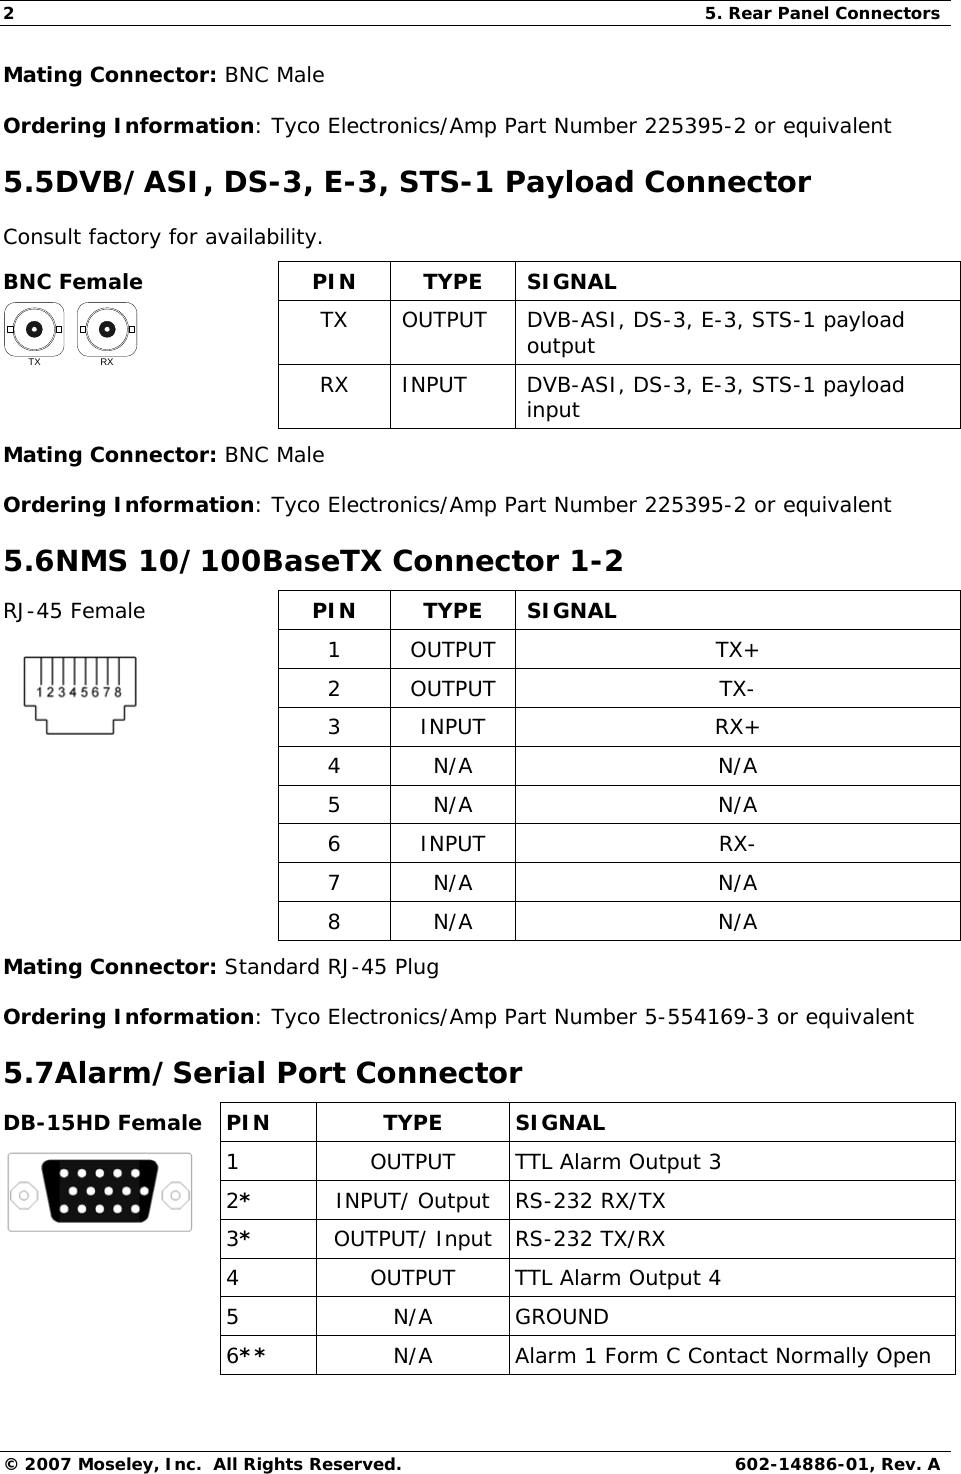 2  5. Rear Panel Connectors © 2007 Moseley, Inc.  All Rights Reserved.  602-14886-01, Rev. A Mating Connector: BNC Male Ordering Information: Tyco Electronics/Amp Part Number 225395-2 or equivalent 5.5DVB/ASI, DS-3, E-3, STS-1 Payload Connector Consult factory for availability. BNC Female  PIN  TYPE  SIGNAL TX  OUTPUT  DVB-ASI, DS-3, E-3, STS-1 payload output RXTX  RX  INPUT  DVB-ASI, DS-3, E-3, STS-1 payload input Mating Connector: BNC Male Ordering Information: Tyco Electronics/Amp Part Number 225395-2 or equivalent 5.6NMS 10/100BaseTX Connector 1-2 RJ-45 Female  PIN  TYPE  SIGNAL 1 OUTPUT  TX+ 2 OUTPUT  TX- 3 INPUT  RX+  4 N/A  N/A  5 N/A  N/A  6 INPUT  RX-  7 N/A  N/A  8 N/A  N/A Mating Connector: Standard RJ-45 Plug Ordering Information: Tyco Electronics/Amp Part Number 5-554169-3 or equivalent 5.7Alarm/Serial Port Connector DB-15HD Female  PIN  TYPE  SIGNAL 1  OUTPUT  TTL Alarm Output 3 2*  INPUT/ Output  RS-232 RX/TX  3*  OUTPUT/ Input  RS-232 TX/RX   4  OUTPUT  TTL Alarm Output 4  5  N/A GROUND  61**   N/A  Alarm 1 Form C Contact Normally Open 